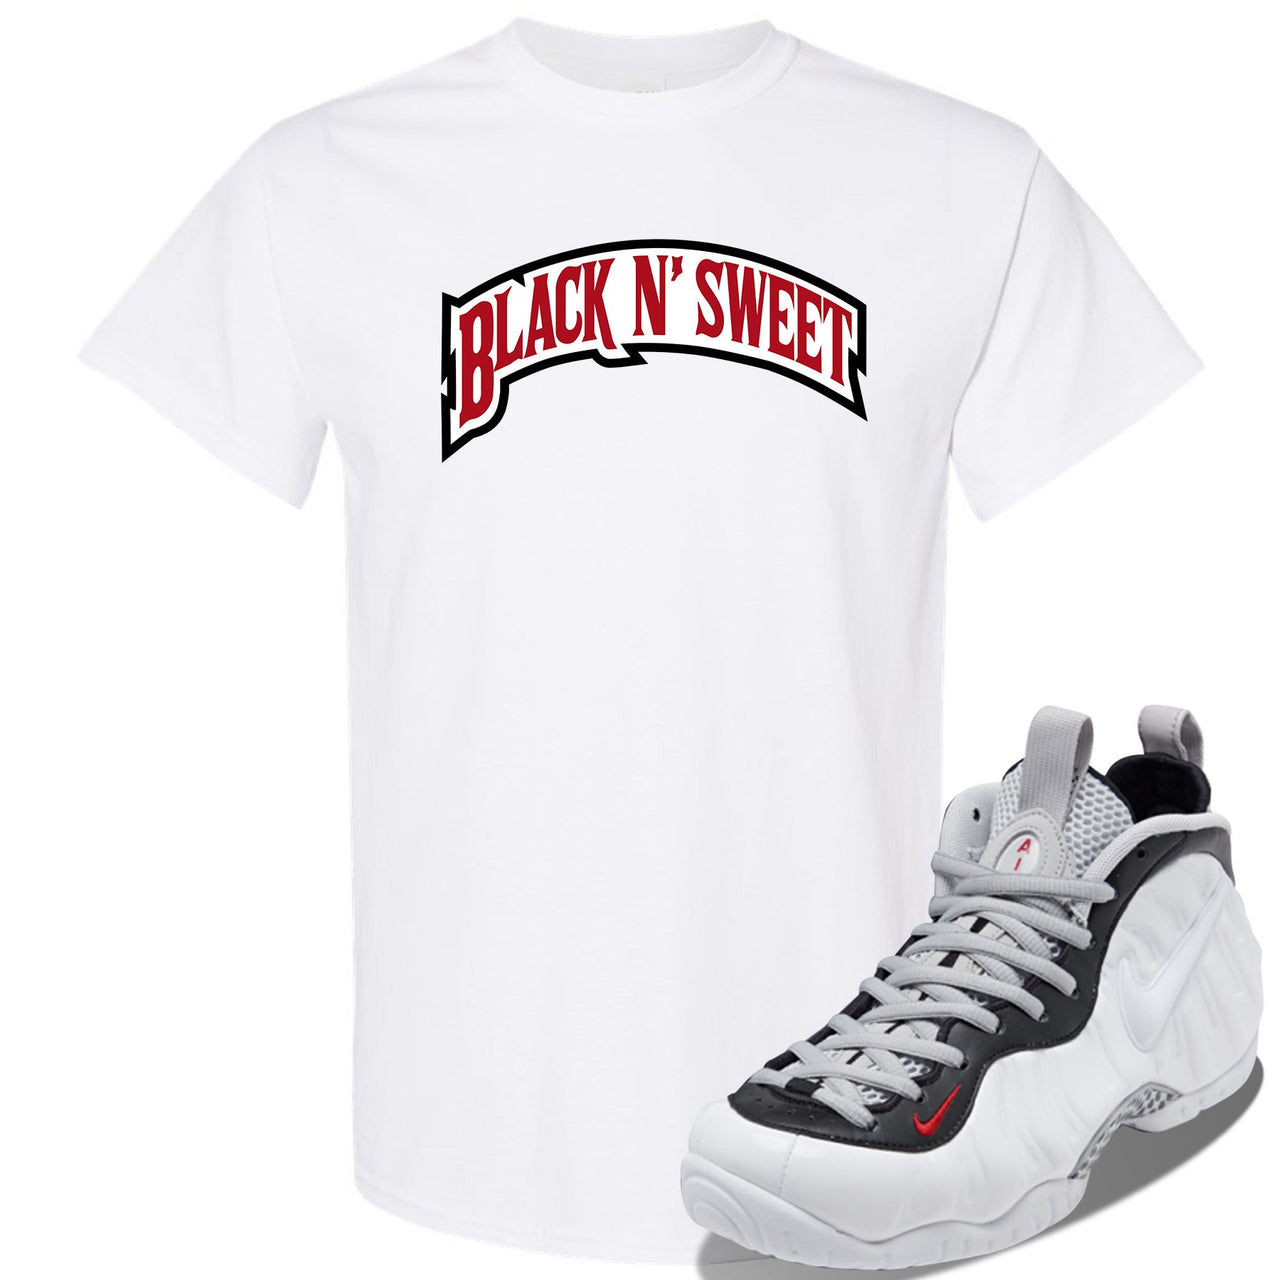 Foamposite Pro White Black University Red Sneaker White T Shirt | Tees to match Nike Air Foamposite Pro White Black University Red Shoes | Black N Sweet Arch